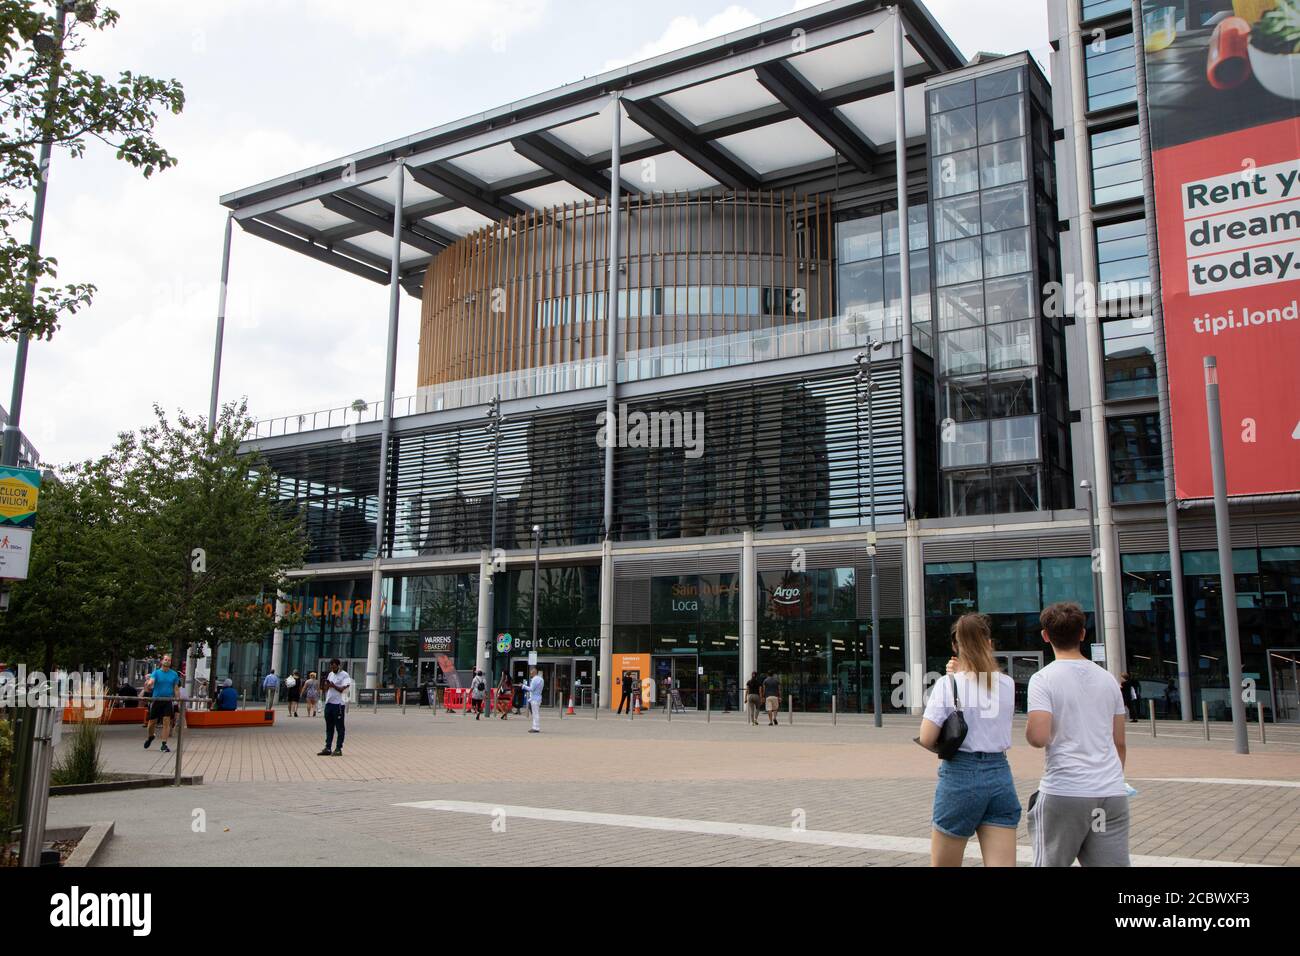 Brent Civic Centre, as seen from the east side. Shops and a library are featured at the ground level. An advert can be seen for renting local housing. Stock Photo